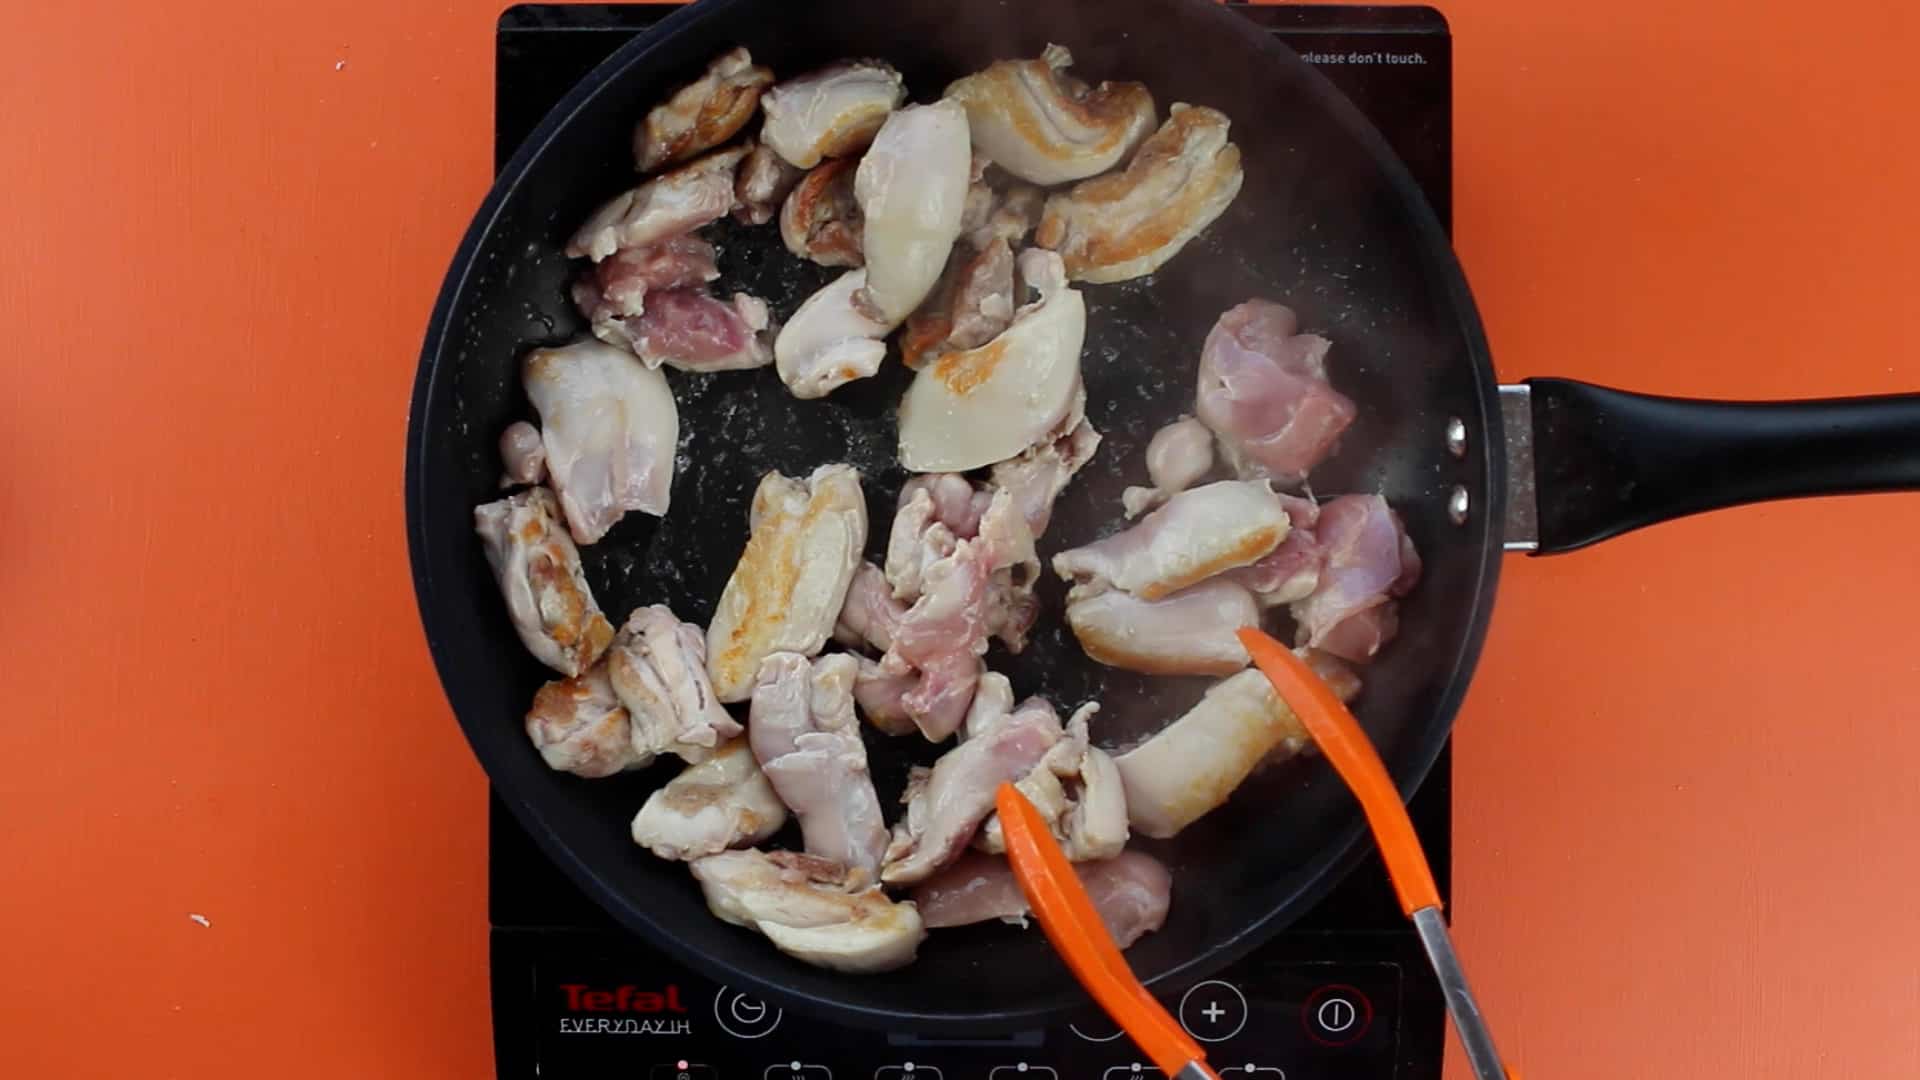 Chicken pieces frying in a pan and rotated with orange tongs on a stove on an orange background.